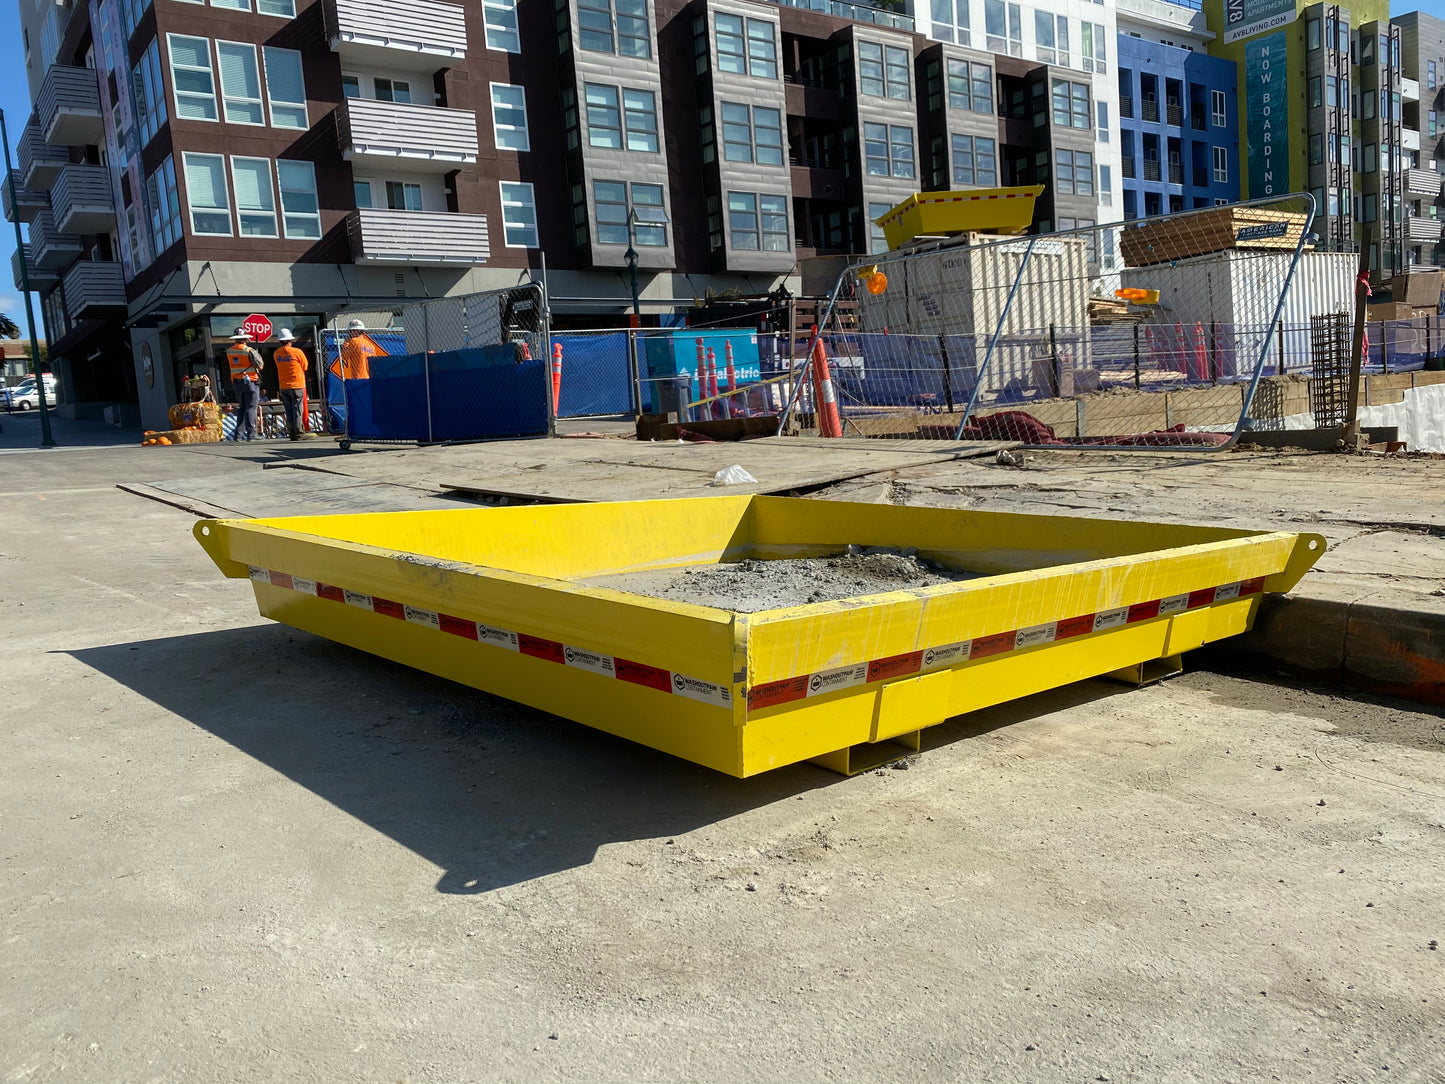 Concrete Washout Pan 84x84x14” 271 gal. [4 ASTM 572 Gr. 50 Pad eye plates with 1 1/8" lifting eyes] California Engineer Certified | Made in North America |  For concrete pump truck washout | Steel reusable leakproof | Optional rain lid